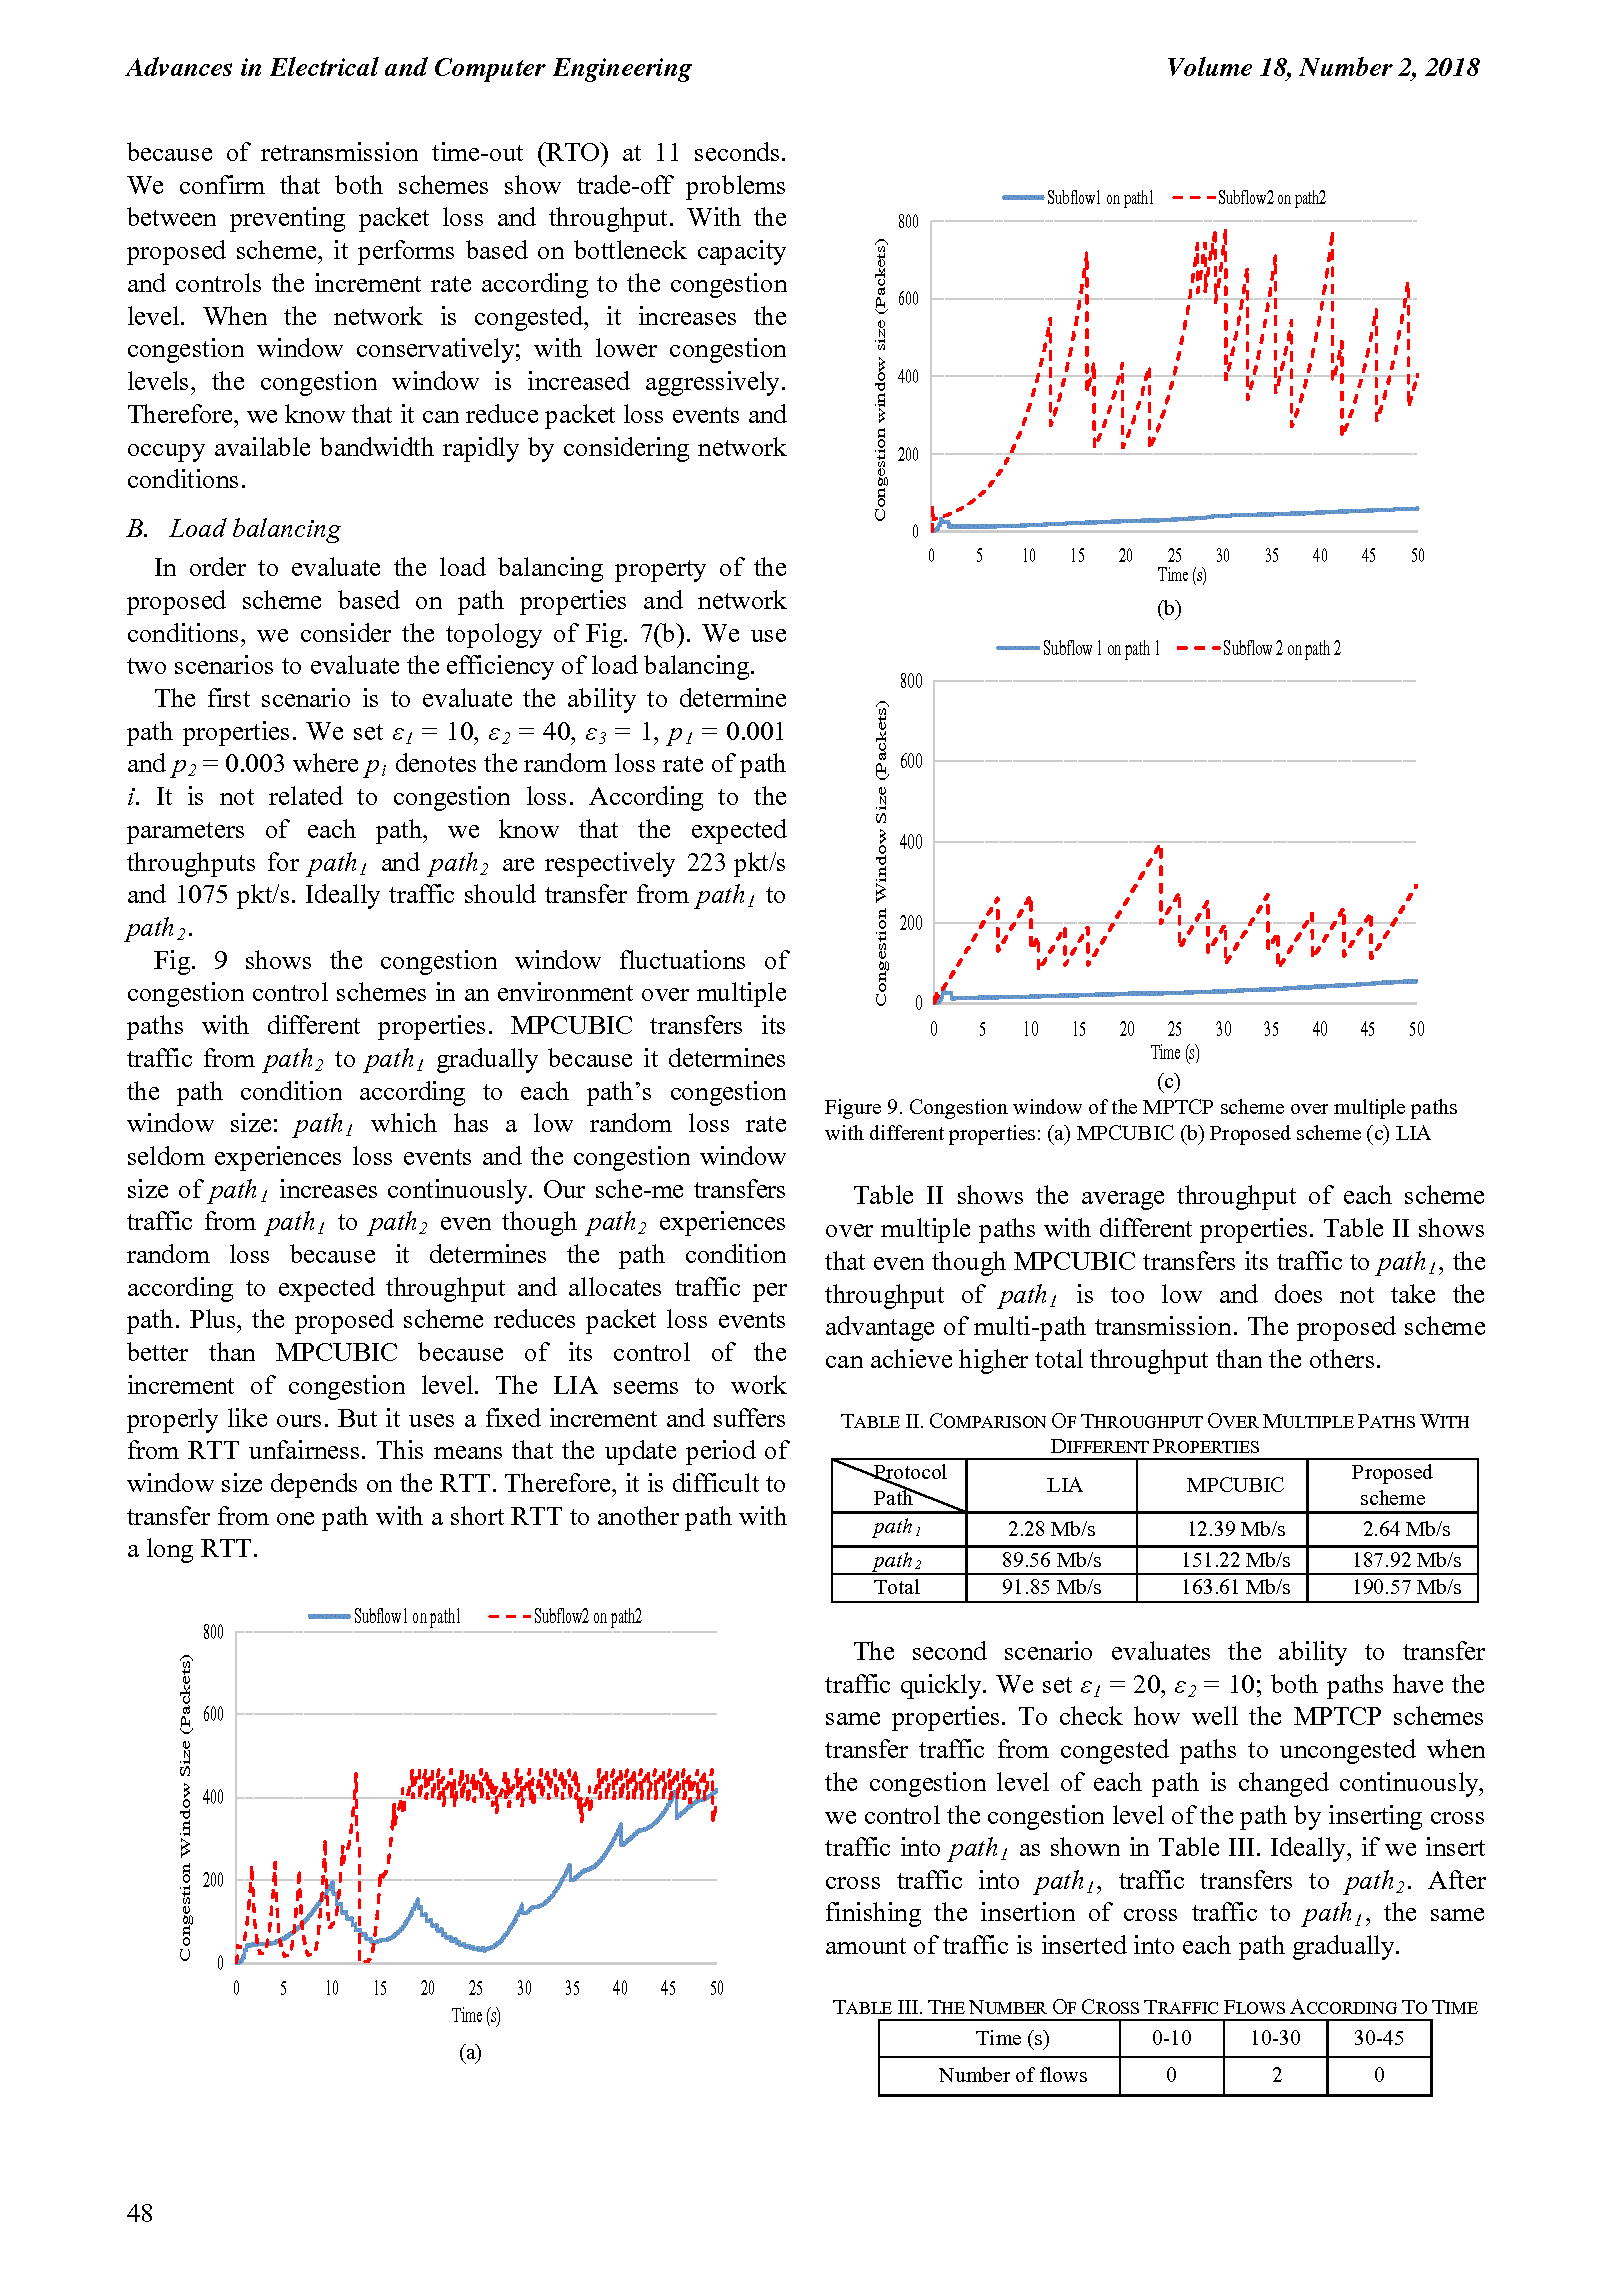 PDF Quickview for paper with DOI:10.4316/AECE.2018.02006